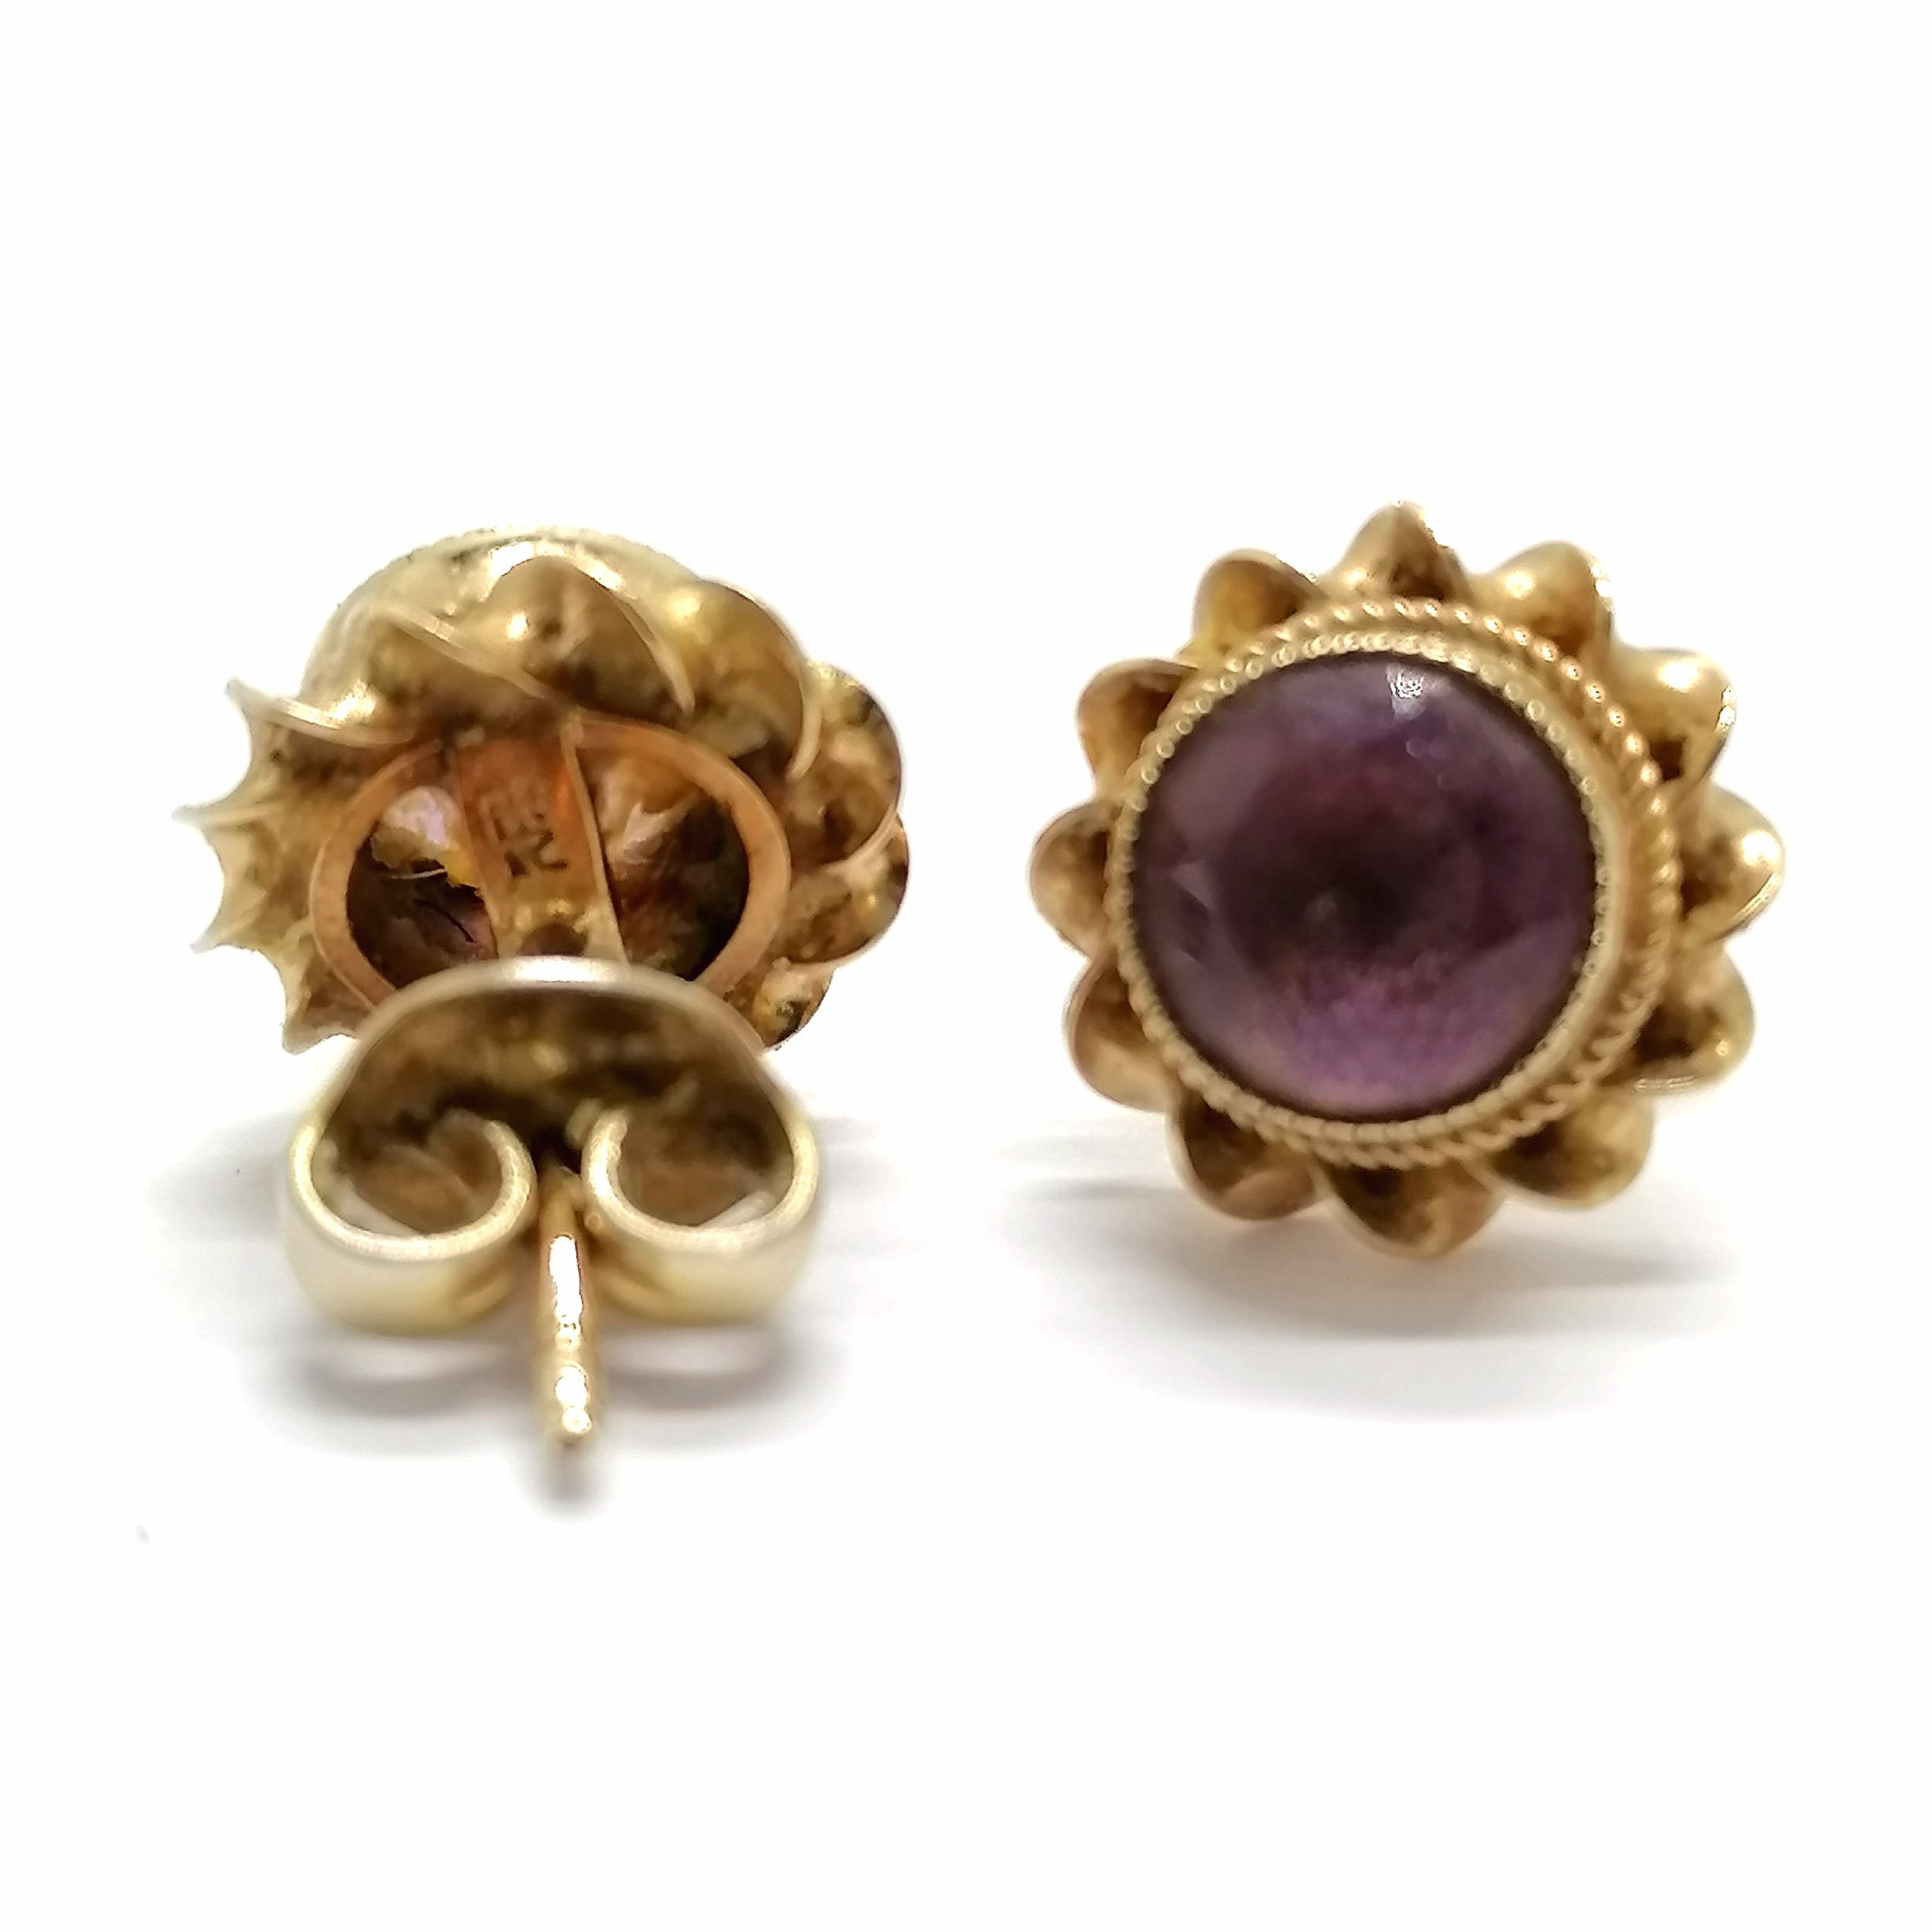 Pair of 9ct hallmarked gold amethyst stone set earrings - 2.2g total weight - SOLD ON BEHALF OF - Image 2 of 2